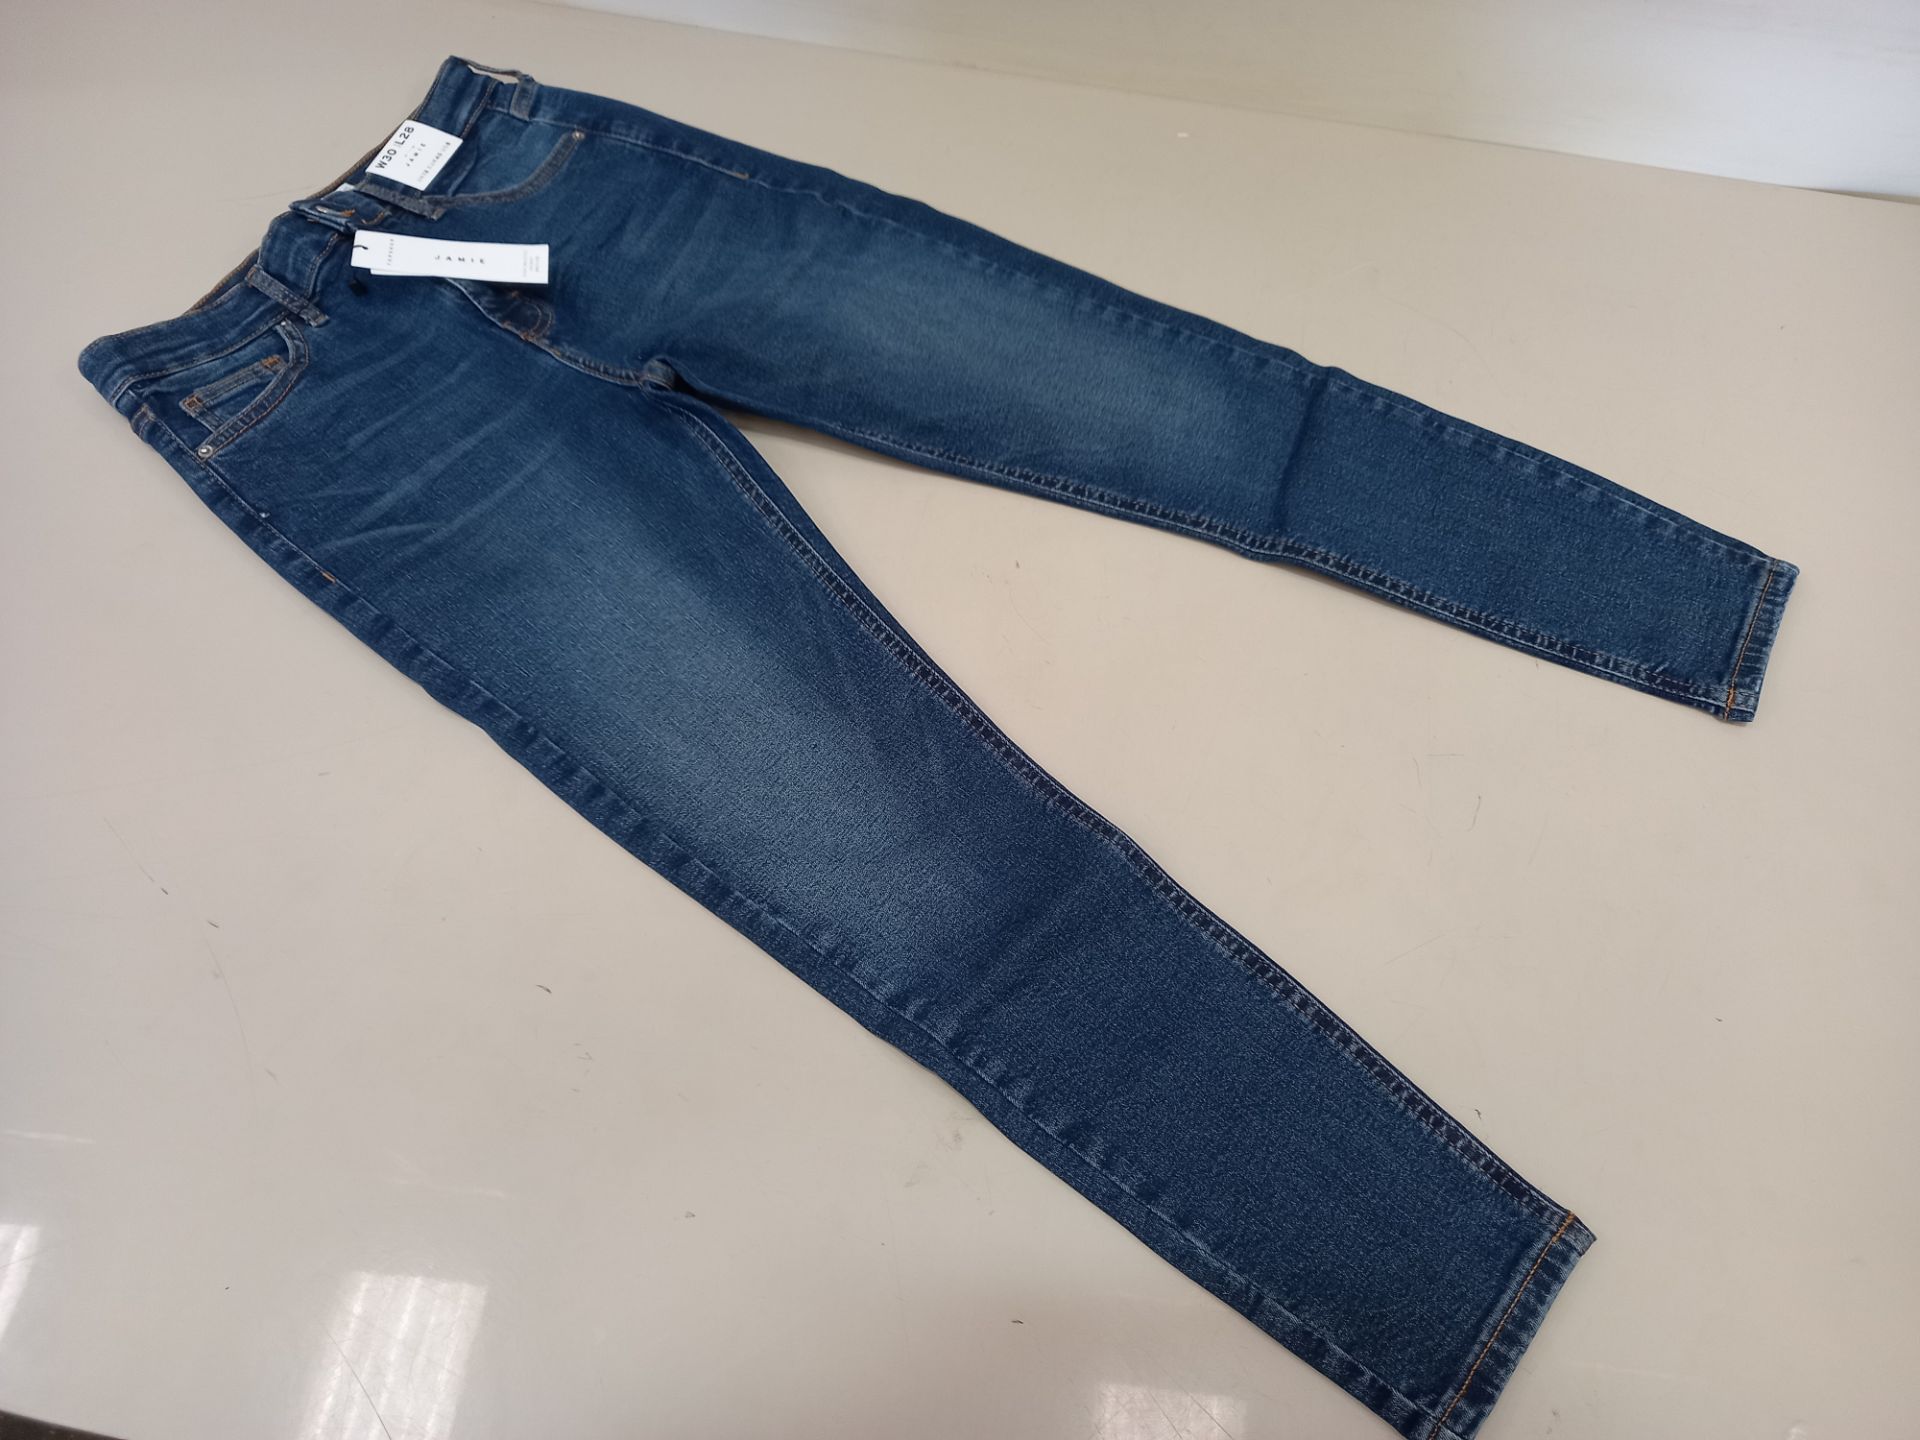 10 X BRAND NEW TOPSHOP JAMIE HIGH WAISTED SKINNY PETITE JEANS UK SIZE 12 RRP £40.00 (TOTAL RRP £